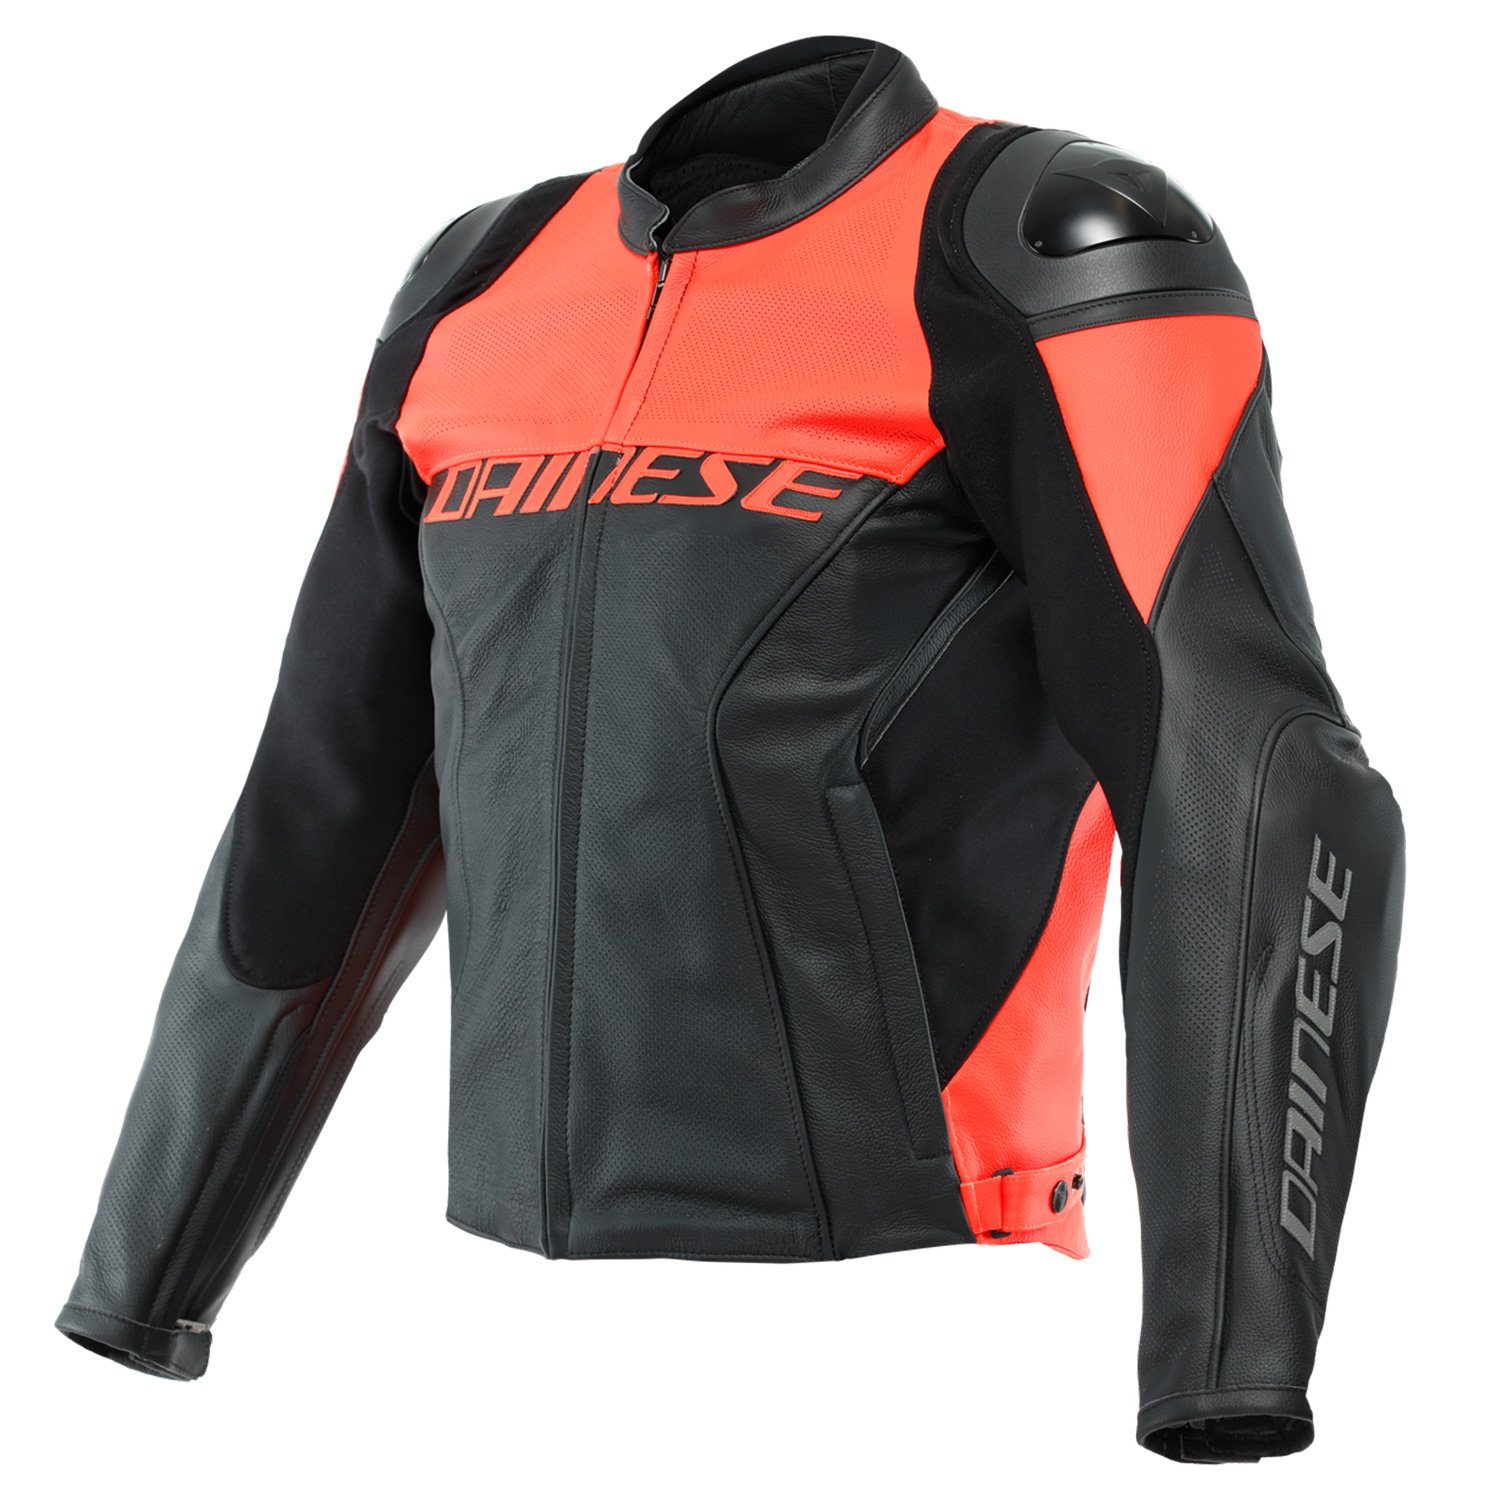 Image of Dainese Racing 4 Perforated Leather Schwarz Fluo Rot Jacke Größe 50